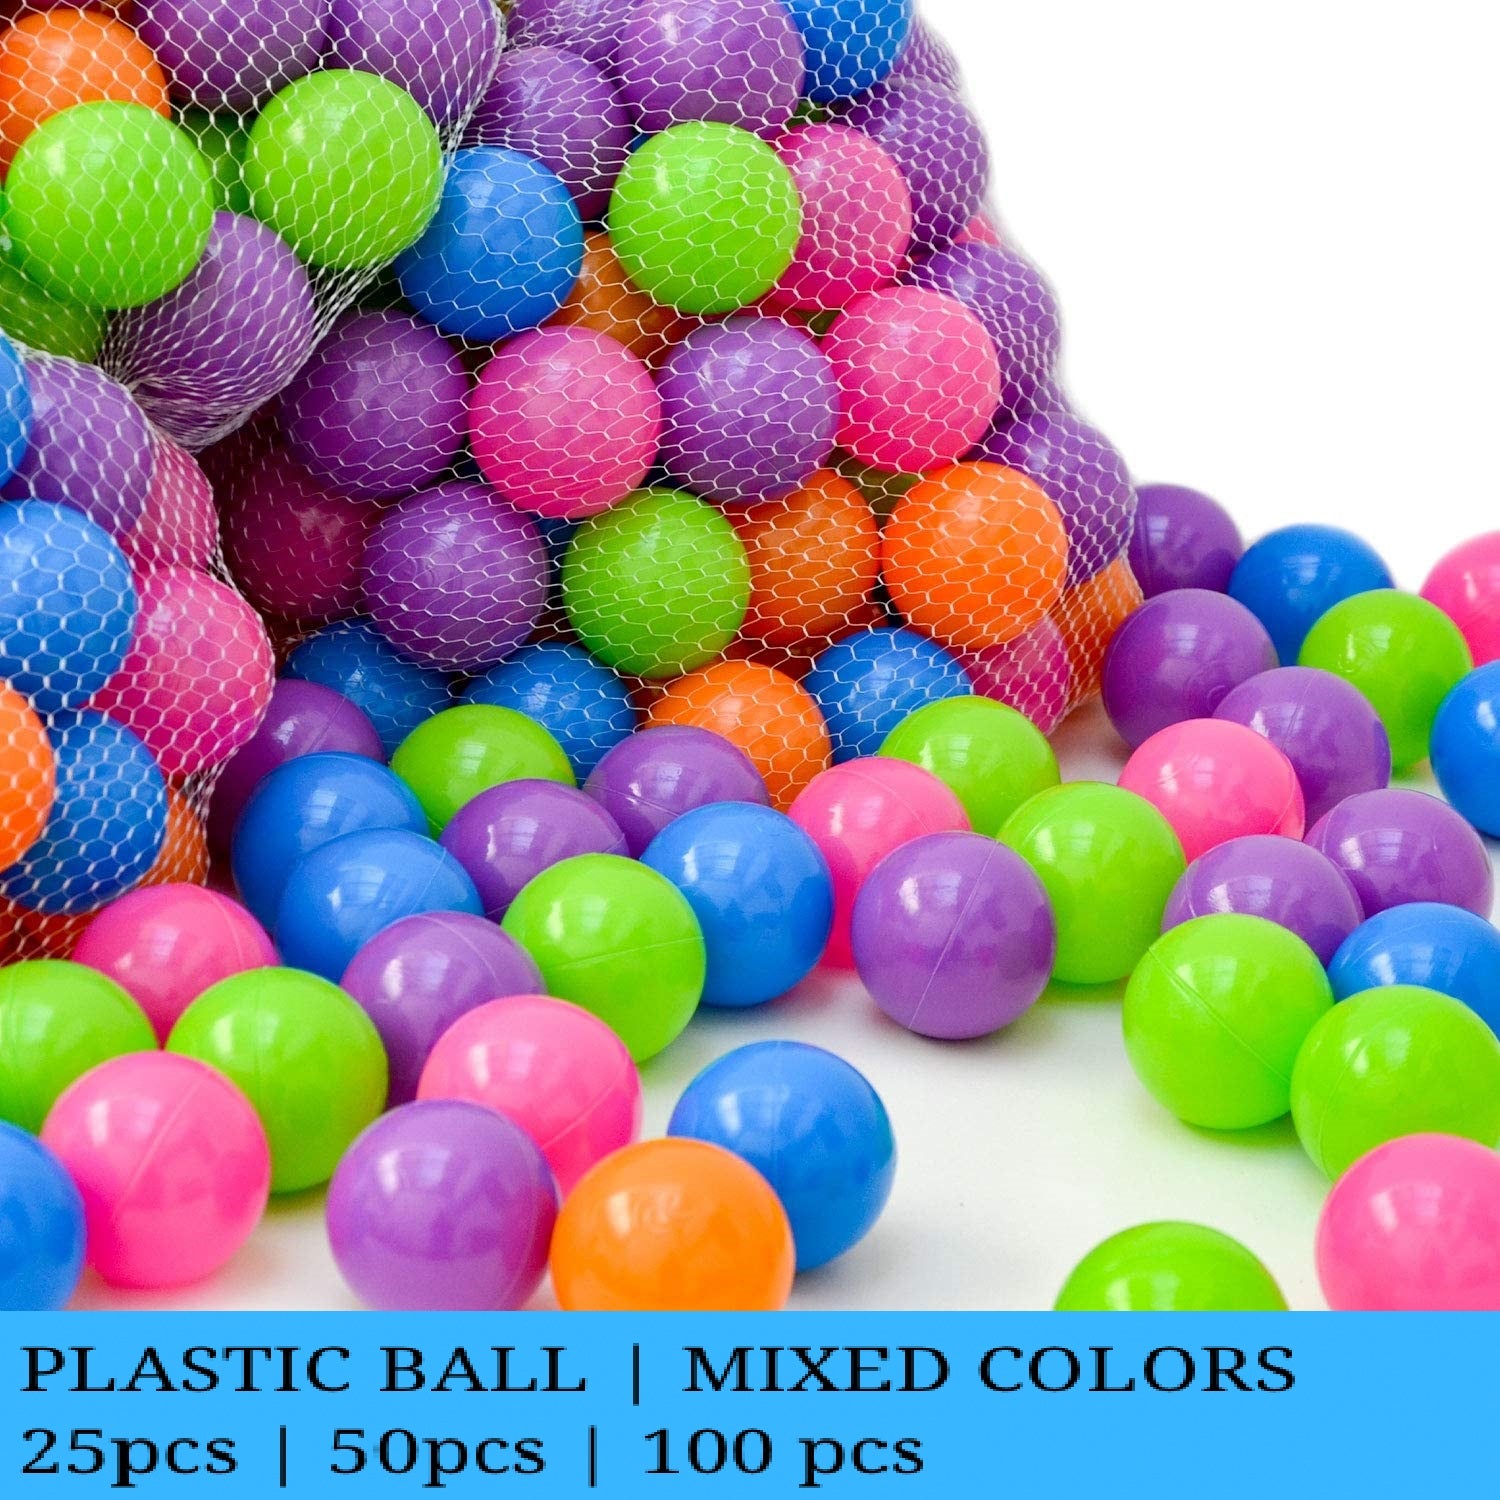 Baby Ball Set | Kids Ball | Balls Toys for Kids | Multicolored Plastic Balls | 50 Balls in 1 Pack | High Quality